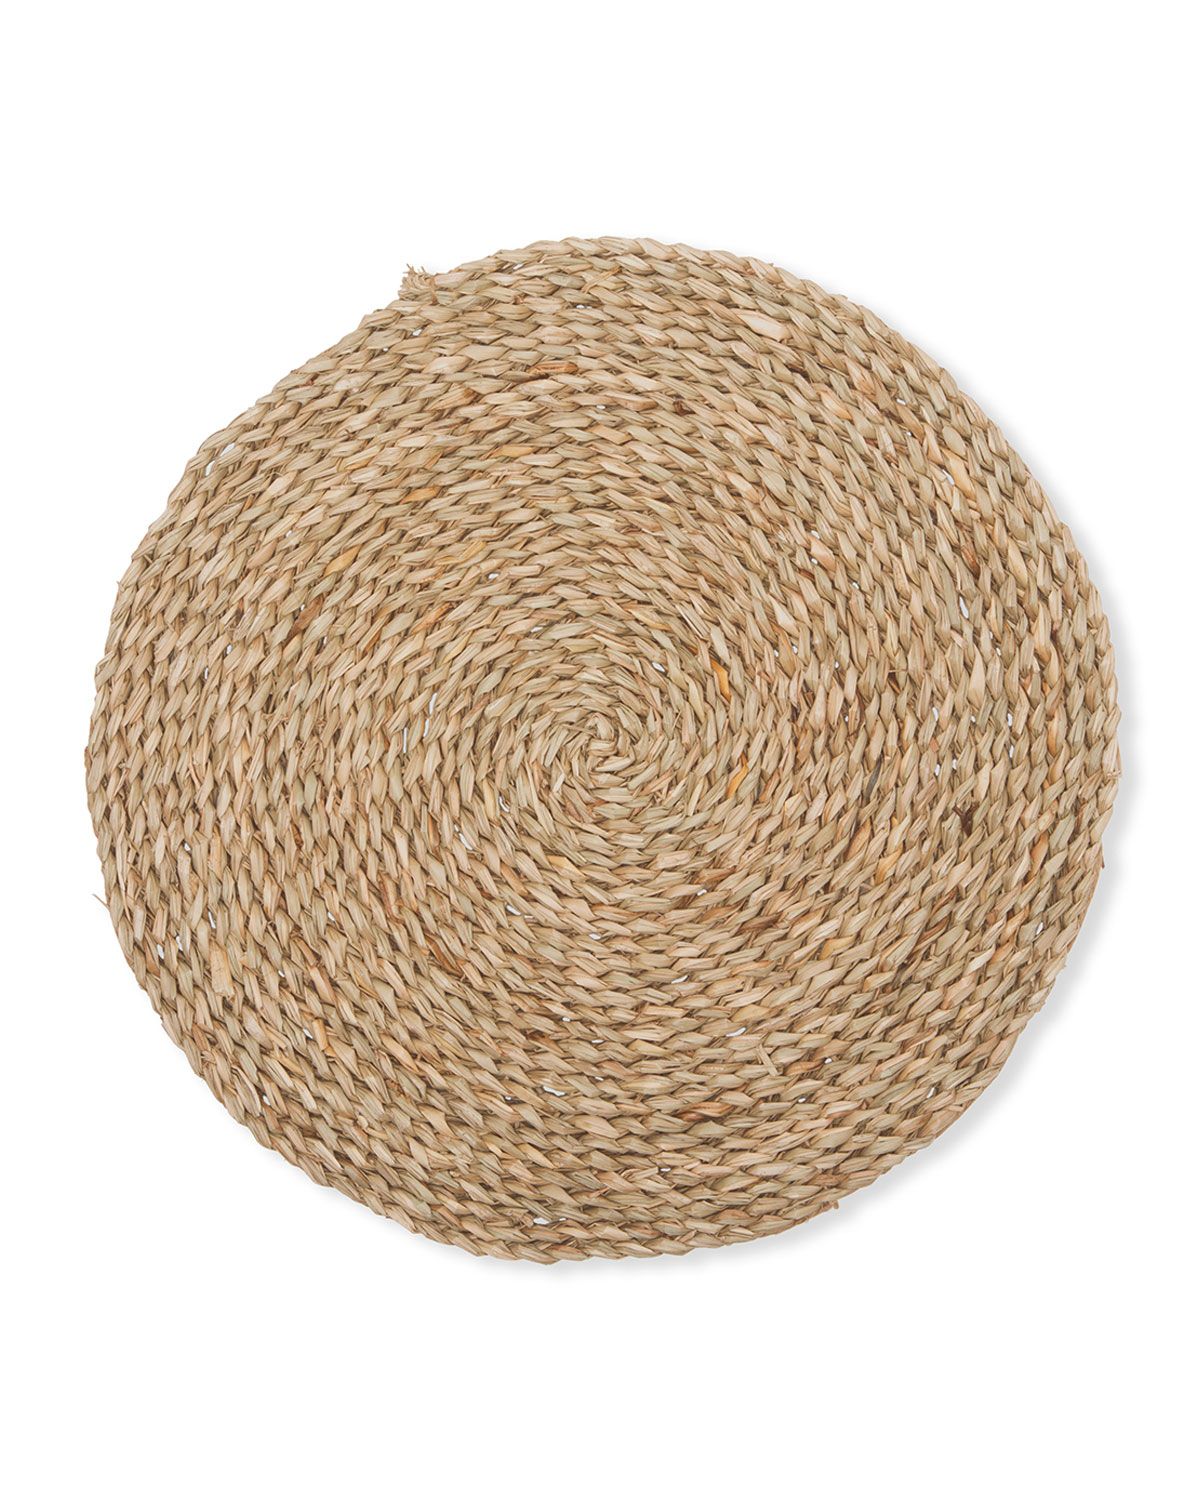 Lucian Round Aged Seagrass Chargers, Set of 4 | Horchow